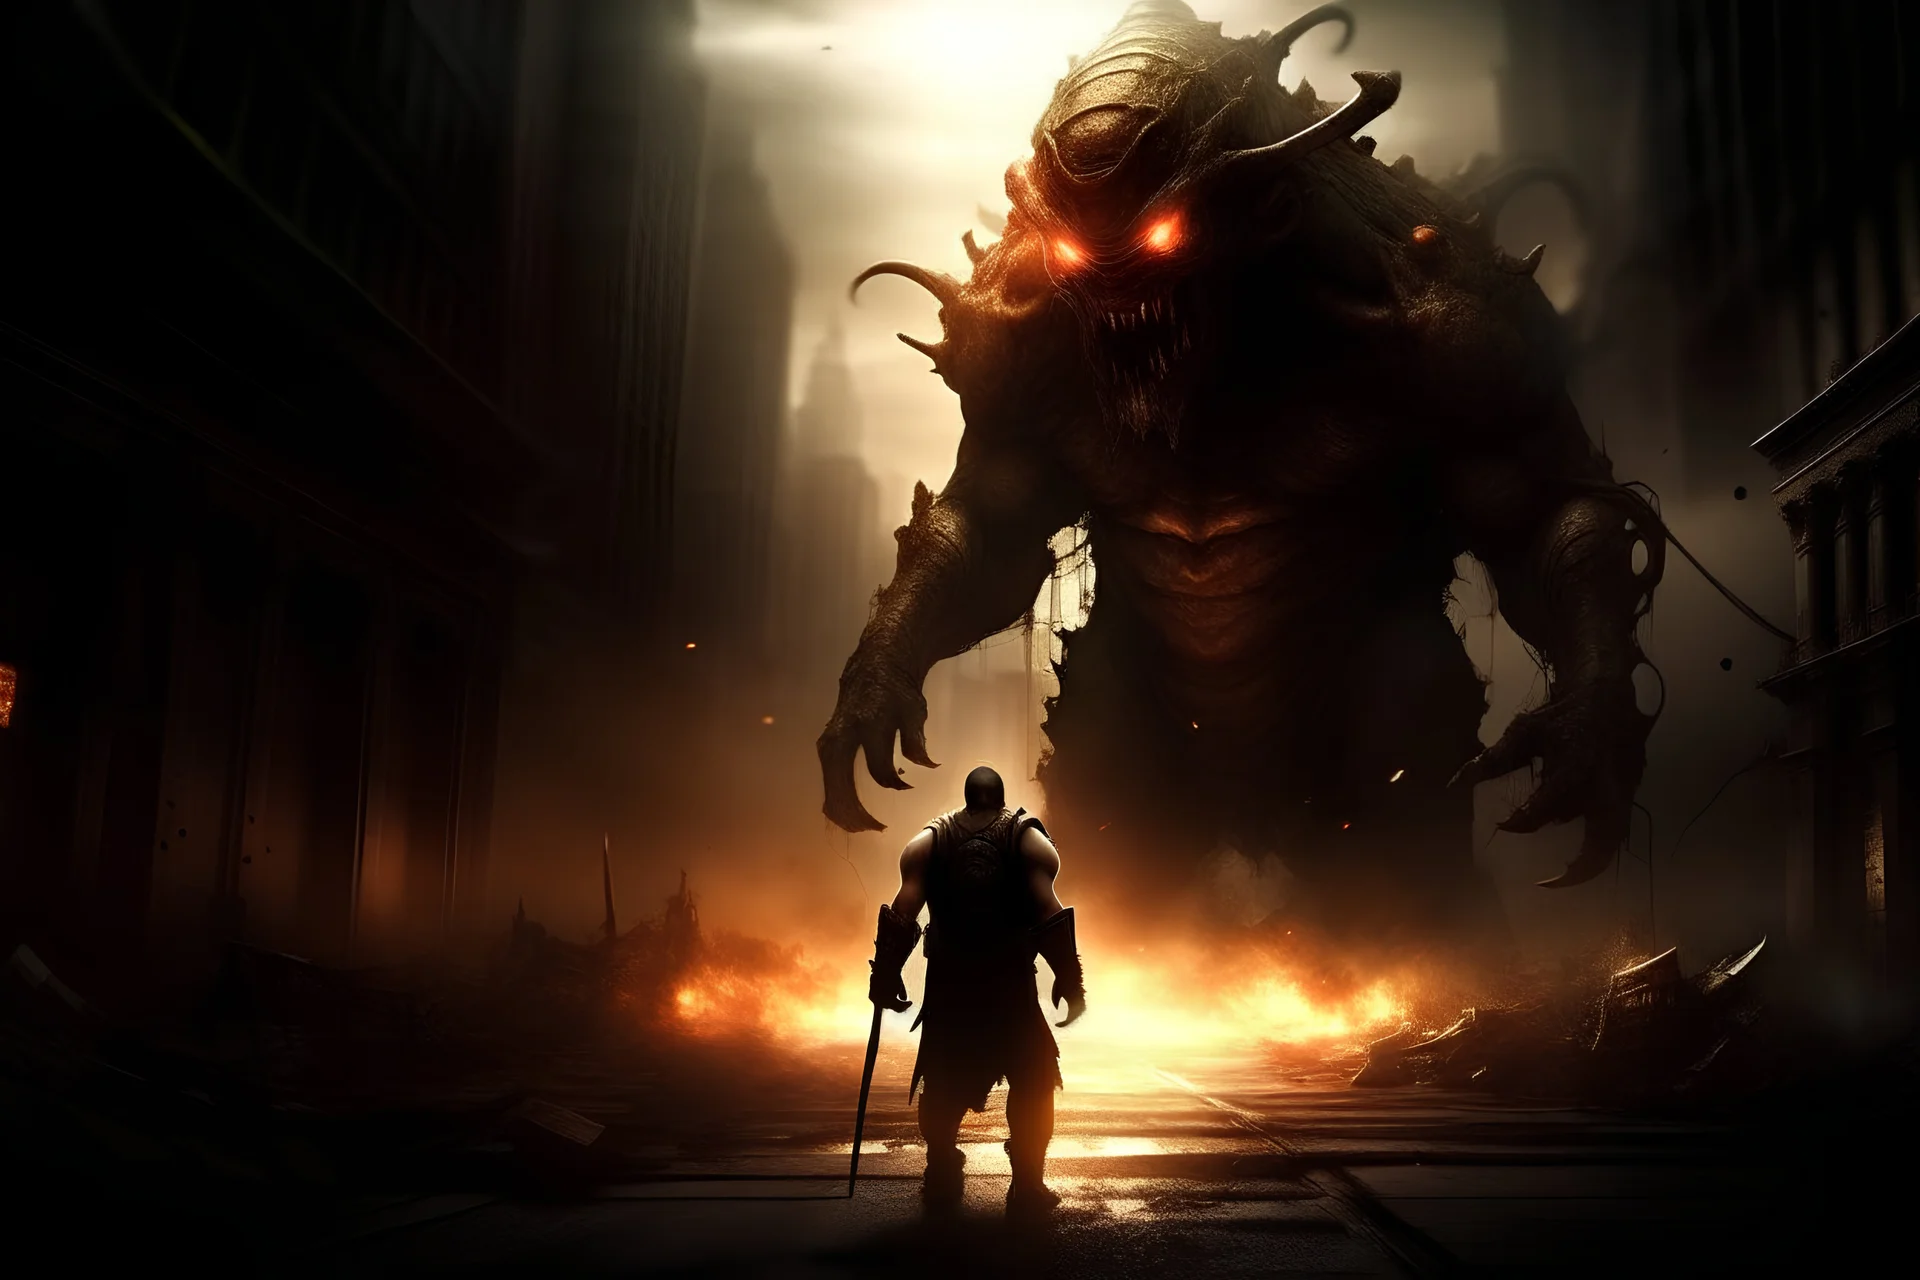 Desktop background god protecting a simple charactature of a man he walks thru a bleak post apocalyptic monster and demon infested urban landscape showing 100 demons shooting firey darts at the man who is protected by a sheild of light.